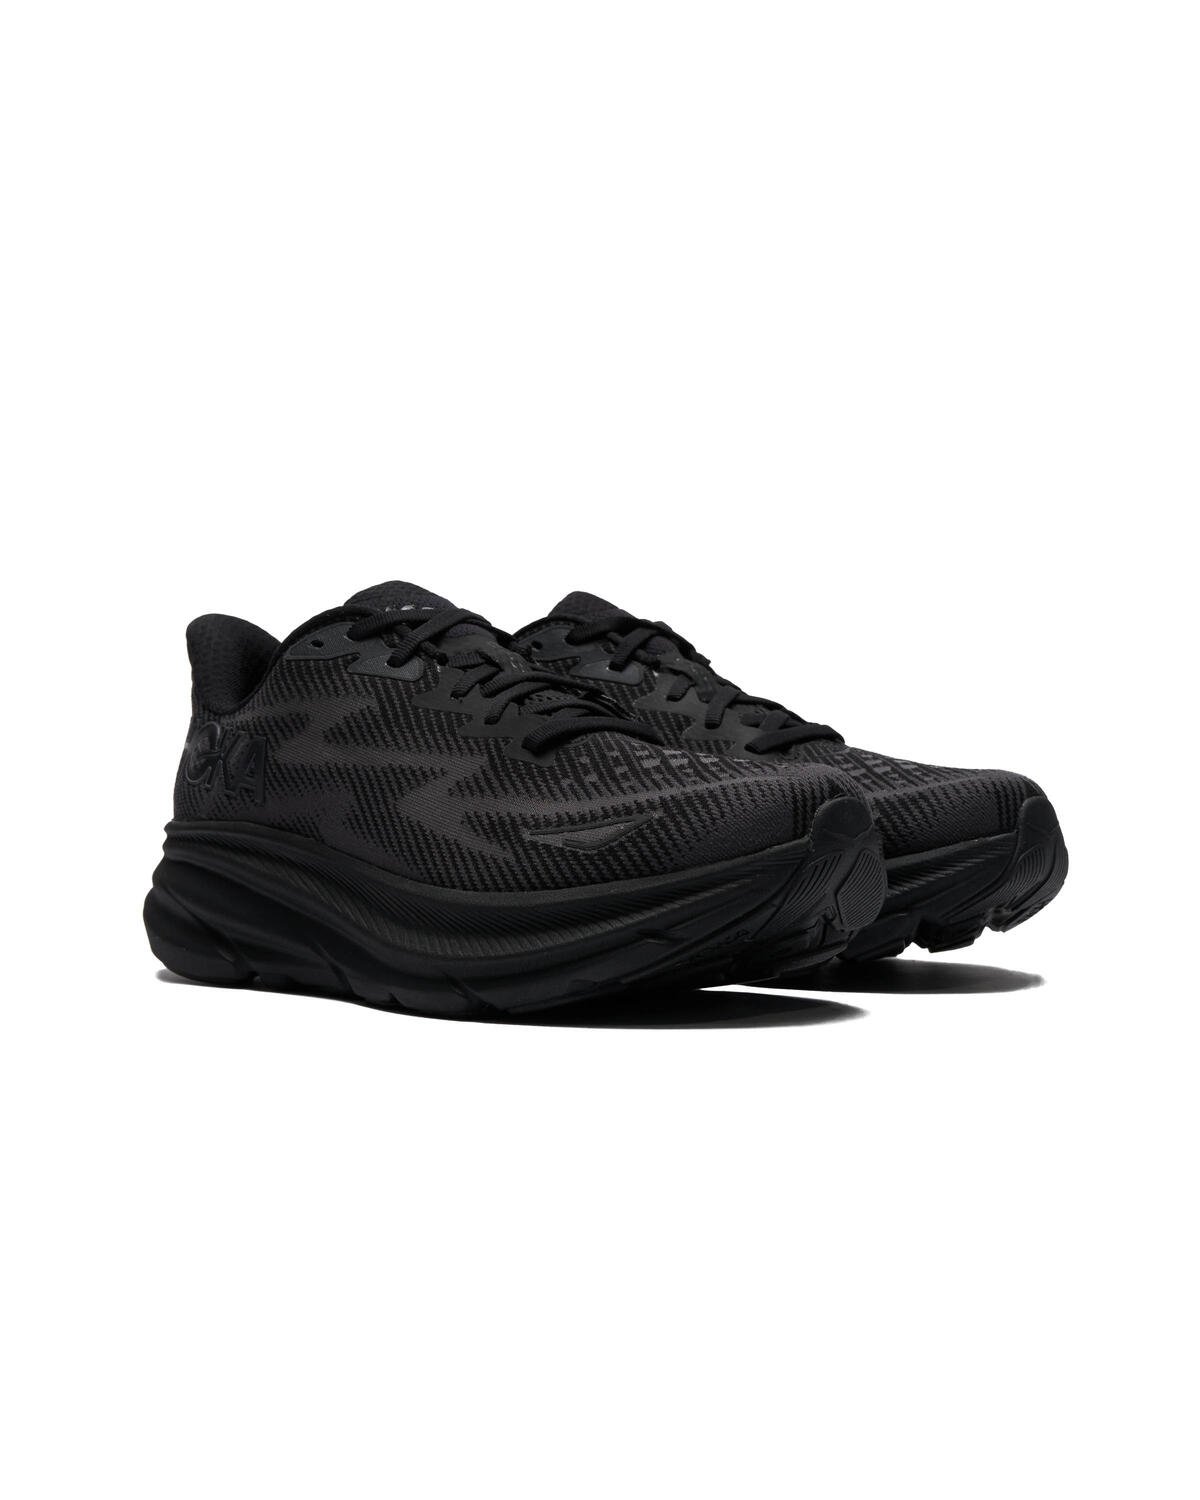 Hoka One One CLIFTON 9 | 1127895-BBLC | AFEW STORE